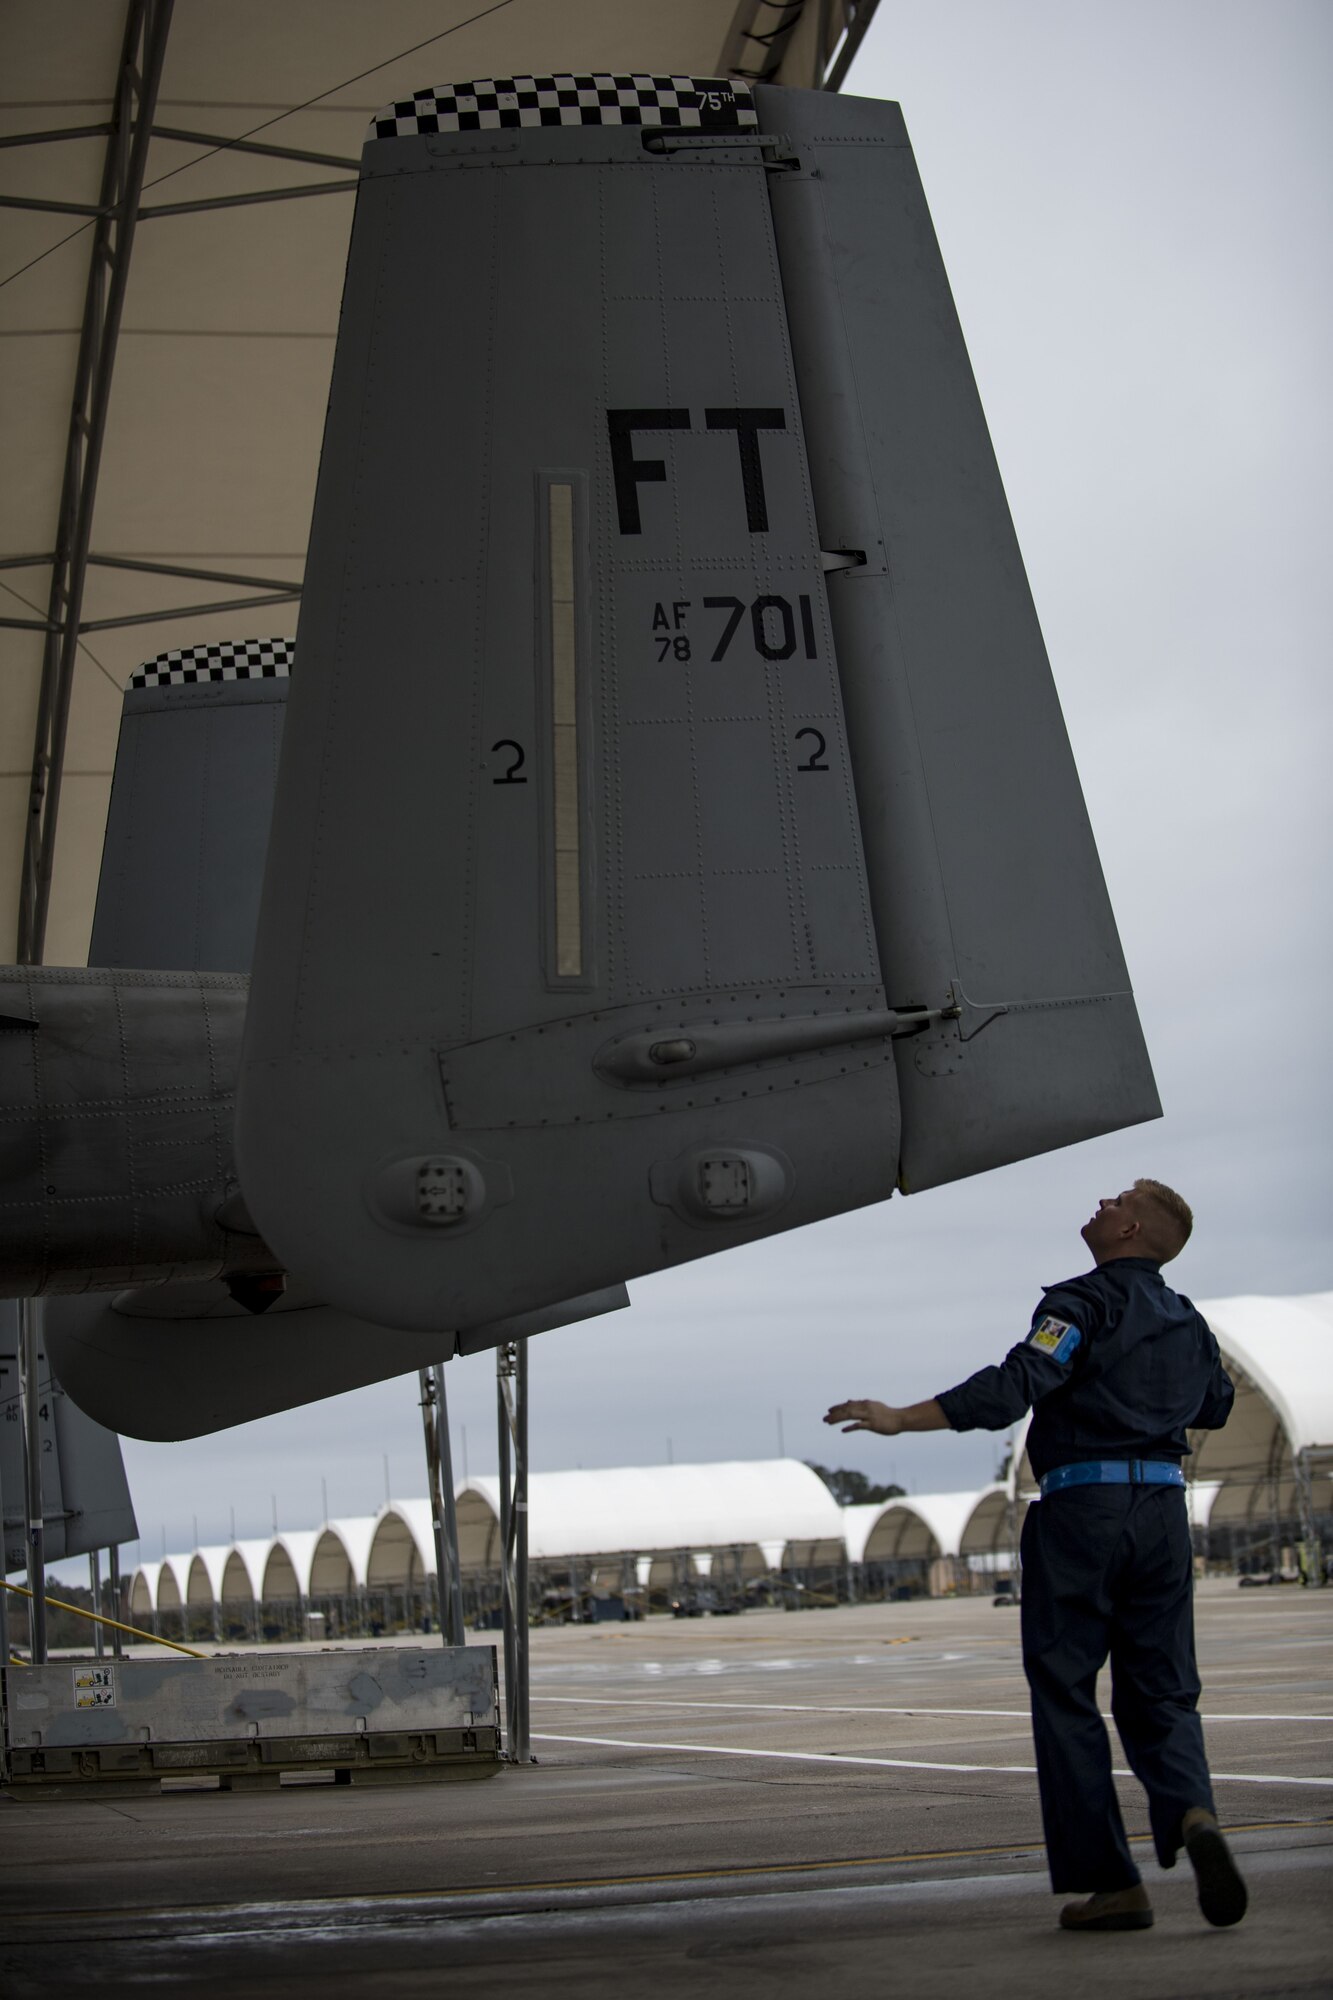 Airman 1st Class Tyler Boyd, 74th Aircraft Maintenance Unit crew chief, performs a thru flight inspection on an A-10C Thunderbolt II, Dec. 7, 2017, at Moody Air Force Base, Ga. Moody recently participated in a week-long, Phase 1, Phase 2 exercise designed to demonstrate the 23d Wing’s ability to meet combatant commander objectives. The exercise tested pilots’ and maintainers’ ability to launch around-the-clock sorties at an accelerated rate during surge operations. (U.S. Air Force photo by Andrea Jenkins)